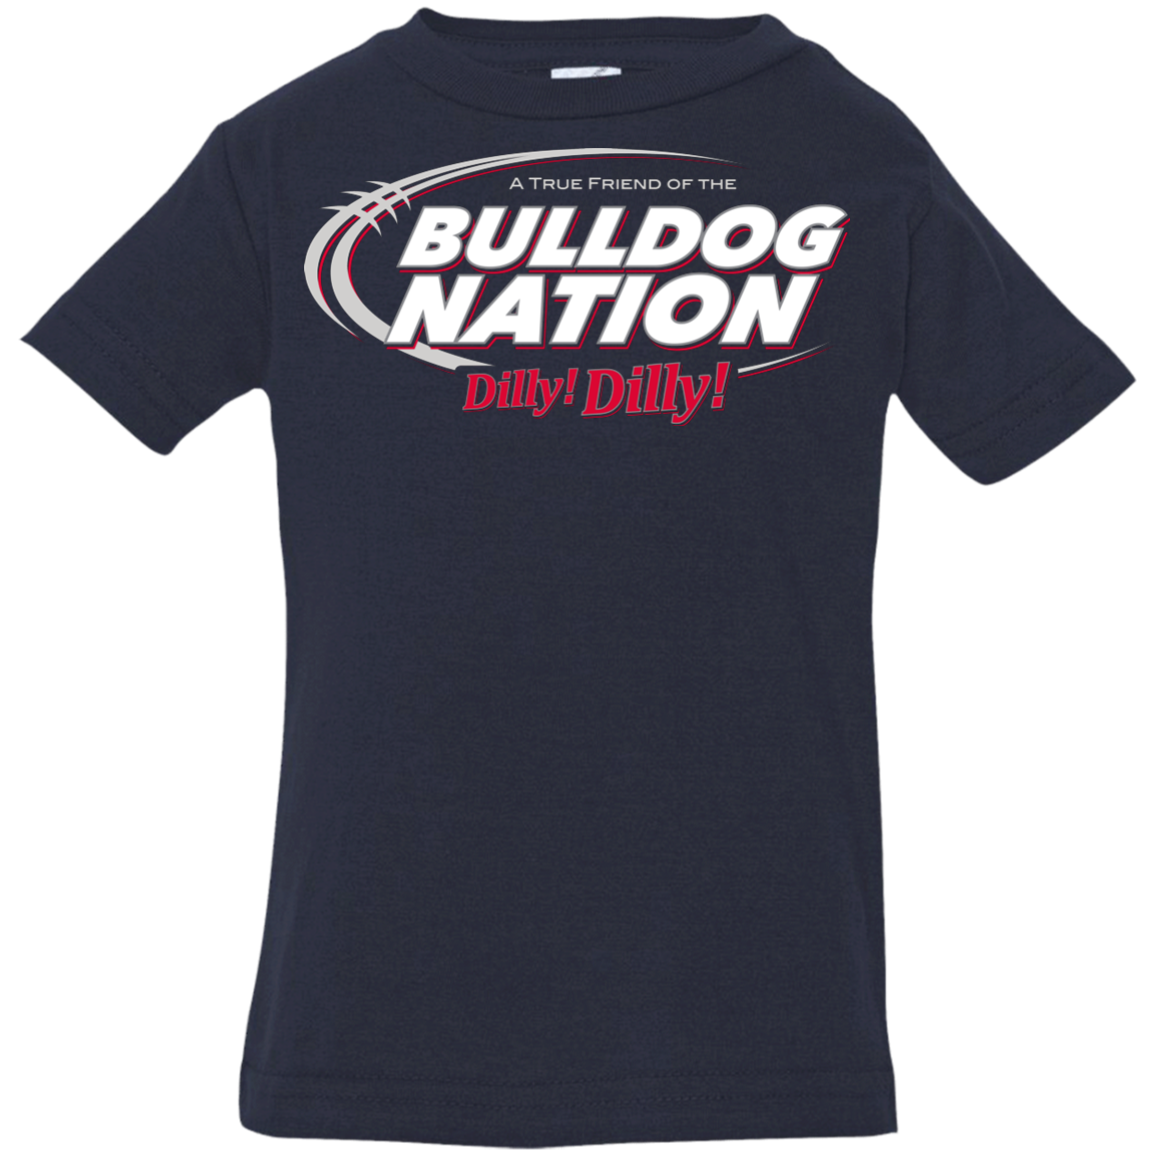 Georgia Dilly Dilly Infant Premium T-Shirt